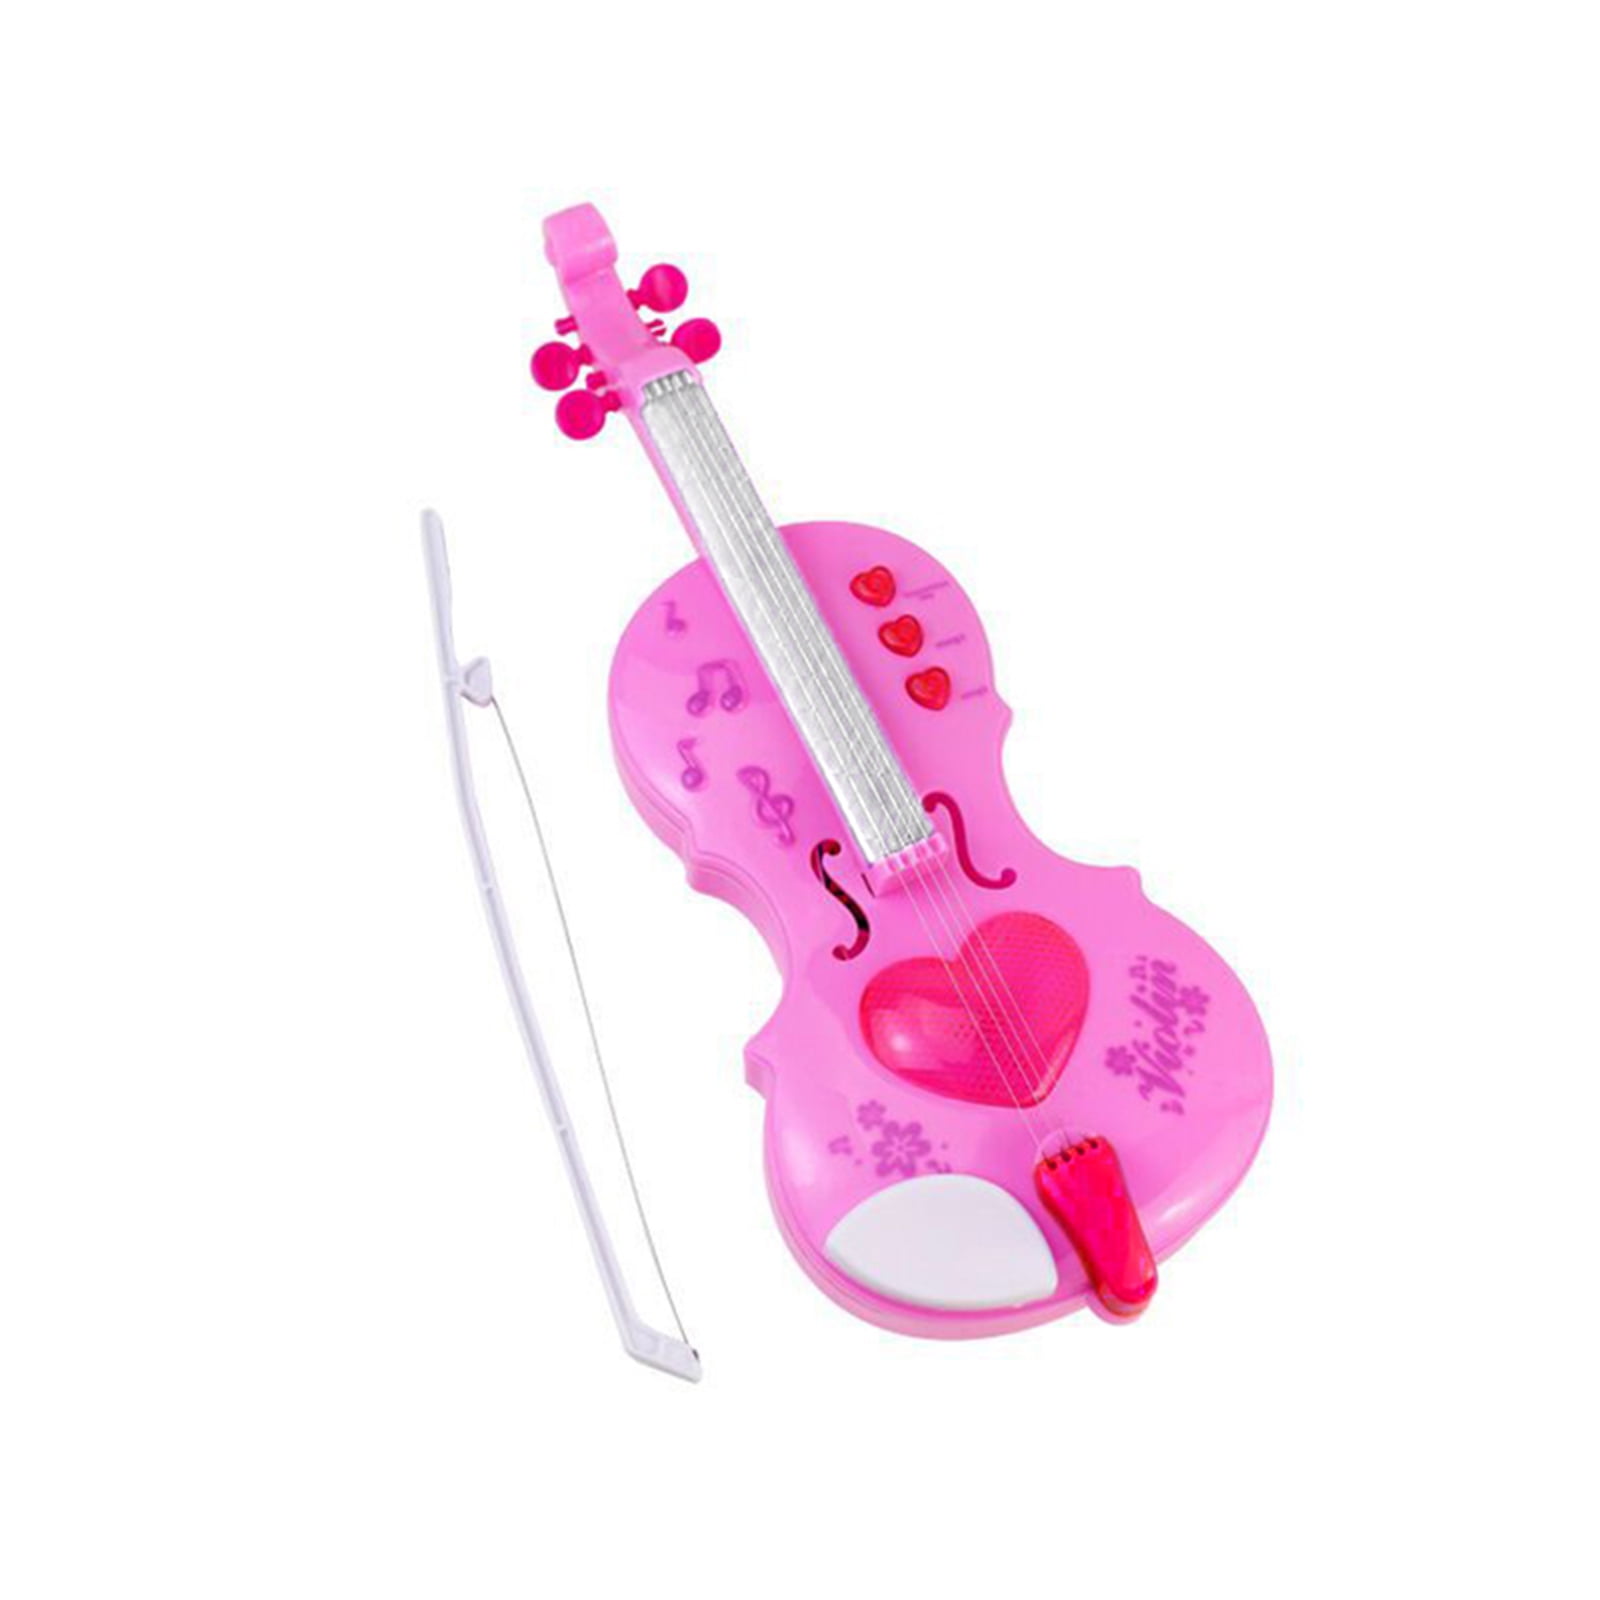 4 Strings Music Electric Violin Kids Musical Instruments Educational Toys #cz 